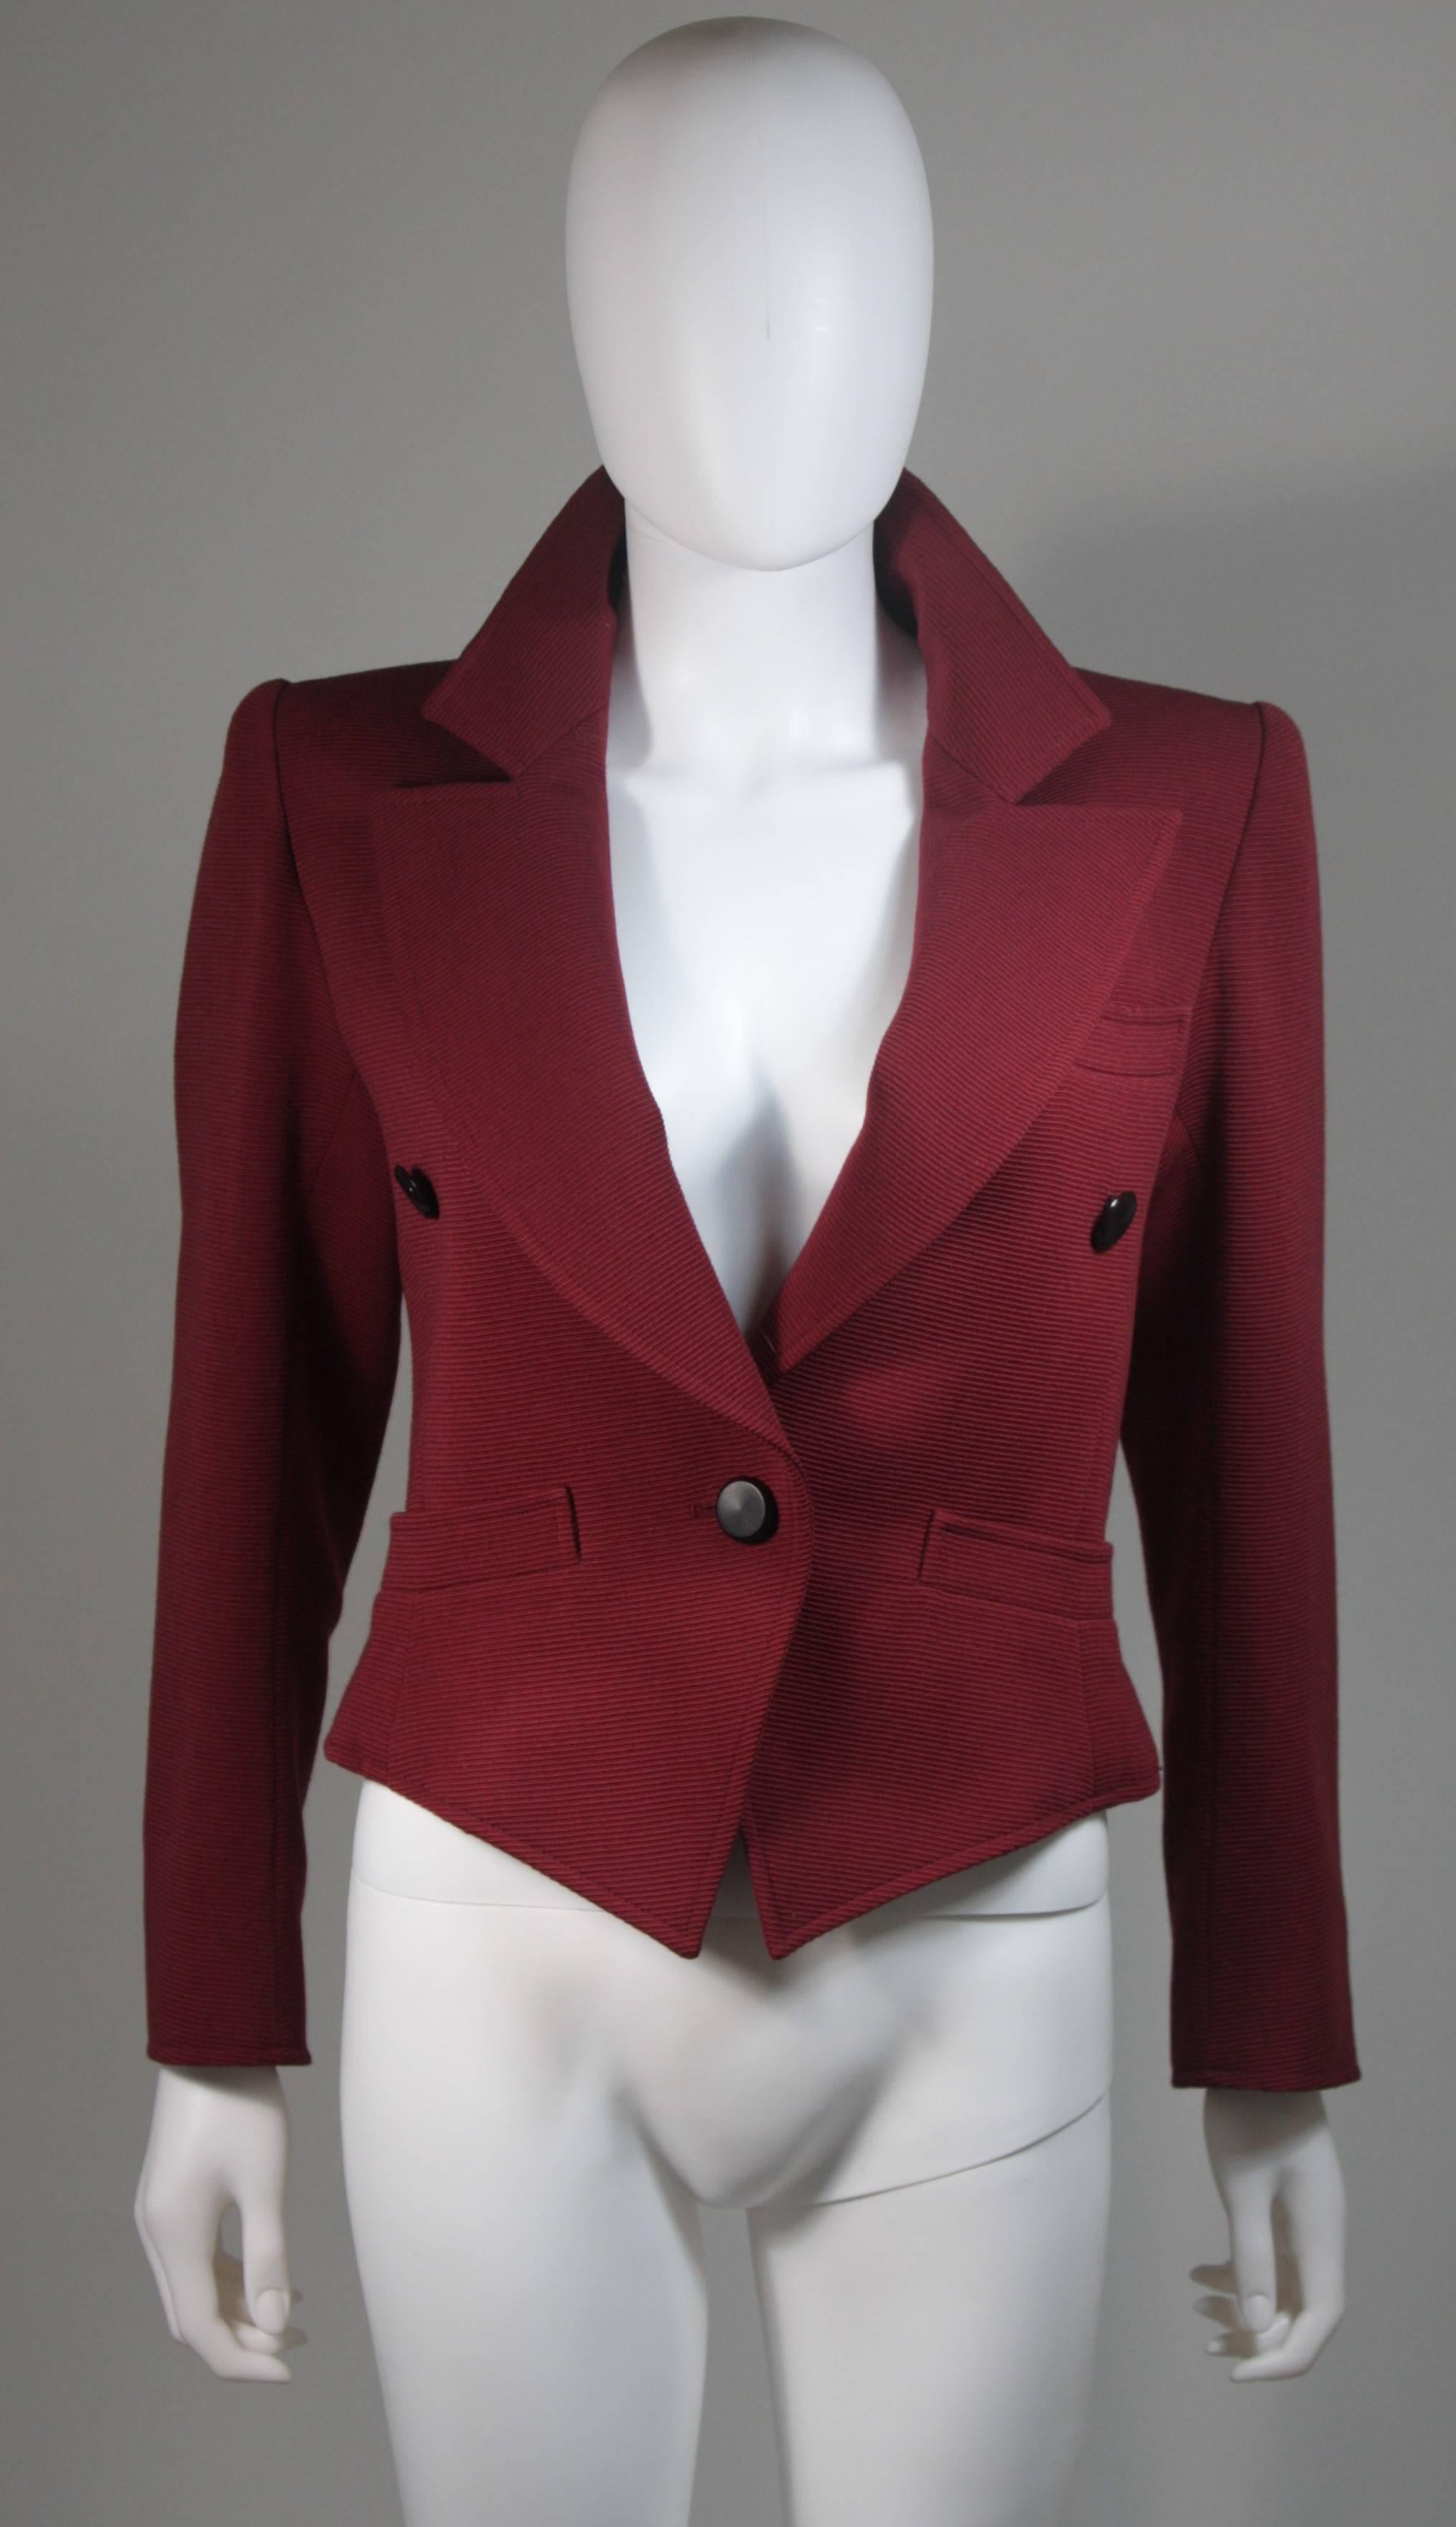  This jacket is composed of a burgundy fabric. Features front pockets and a center front button closure. In excellent vintage condition. Made in France. 

  **Please cross-reference measurements for personal accuracy. Size in description box is an